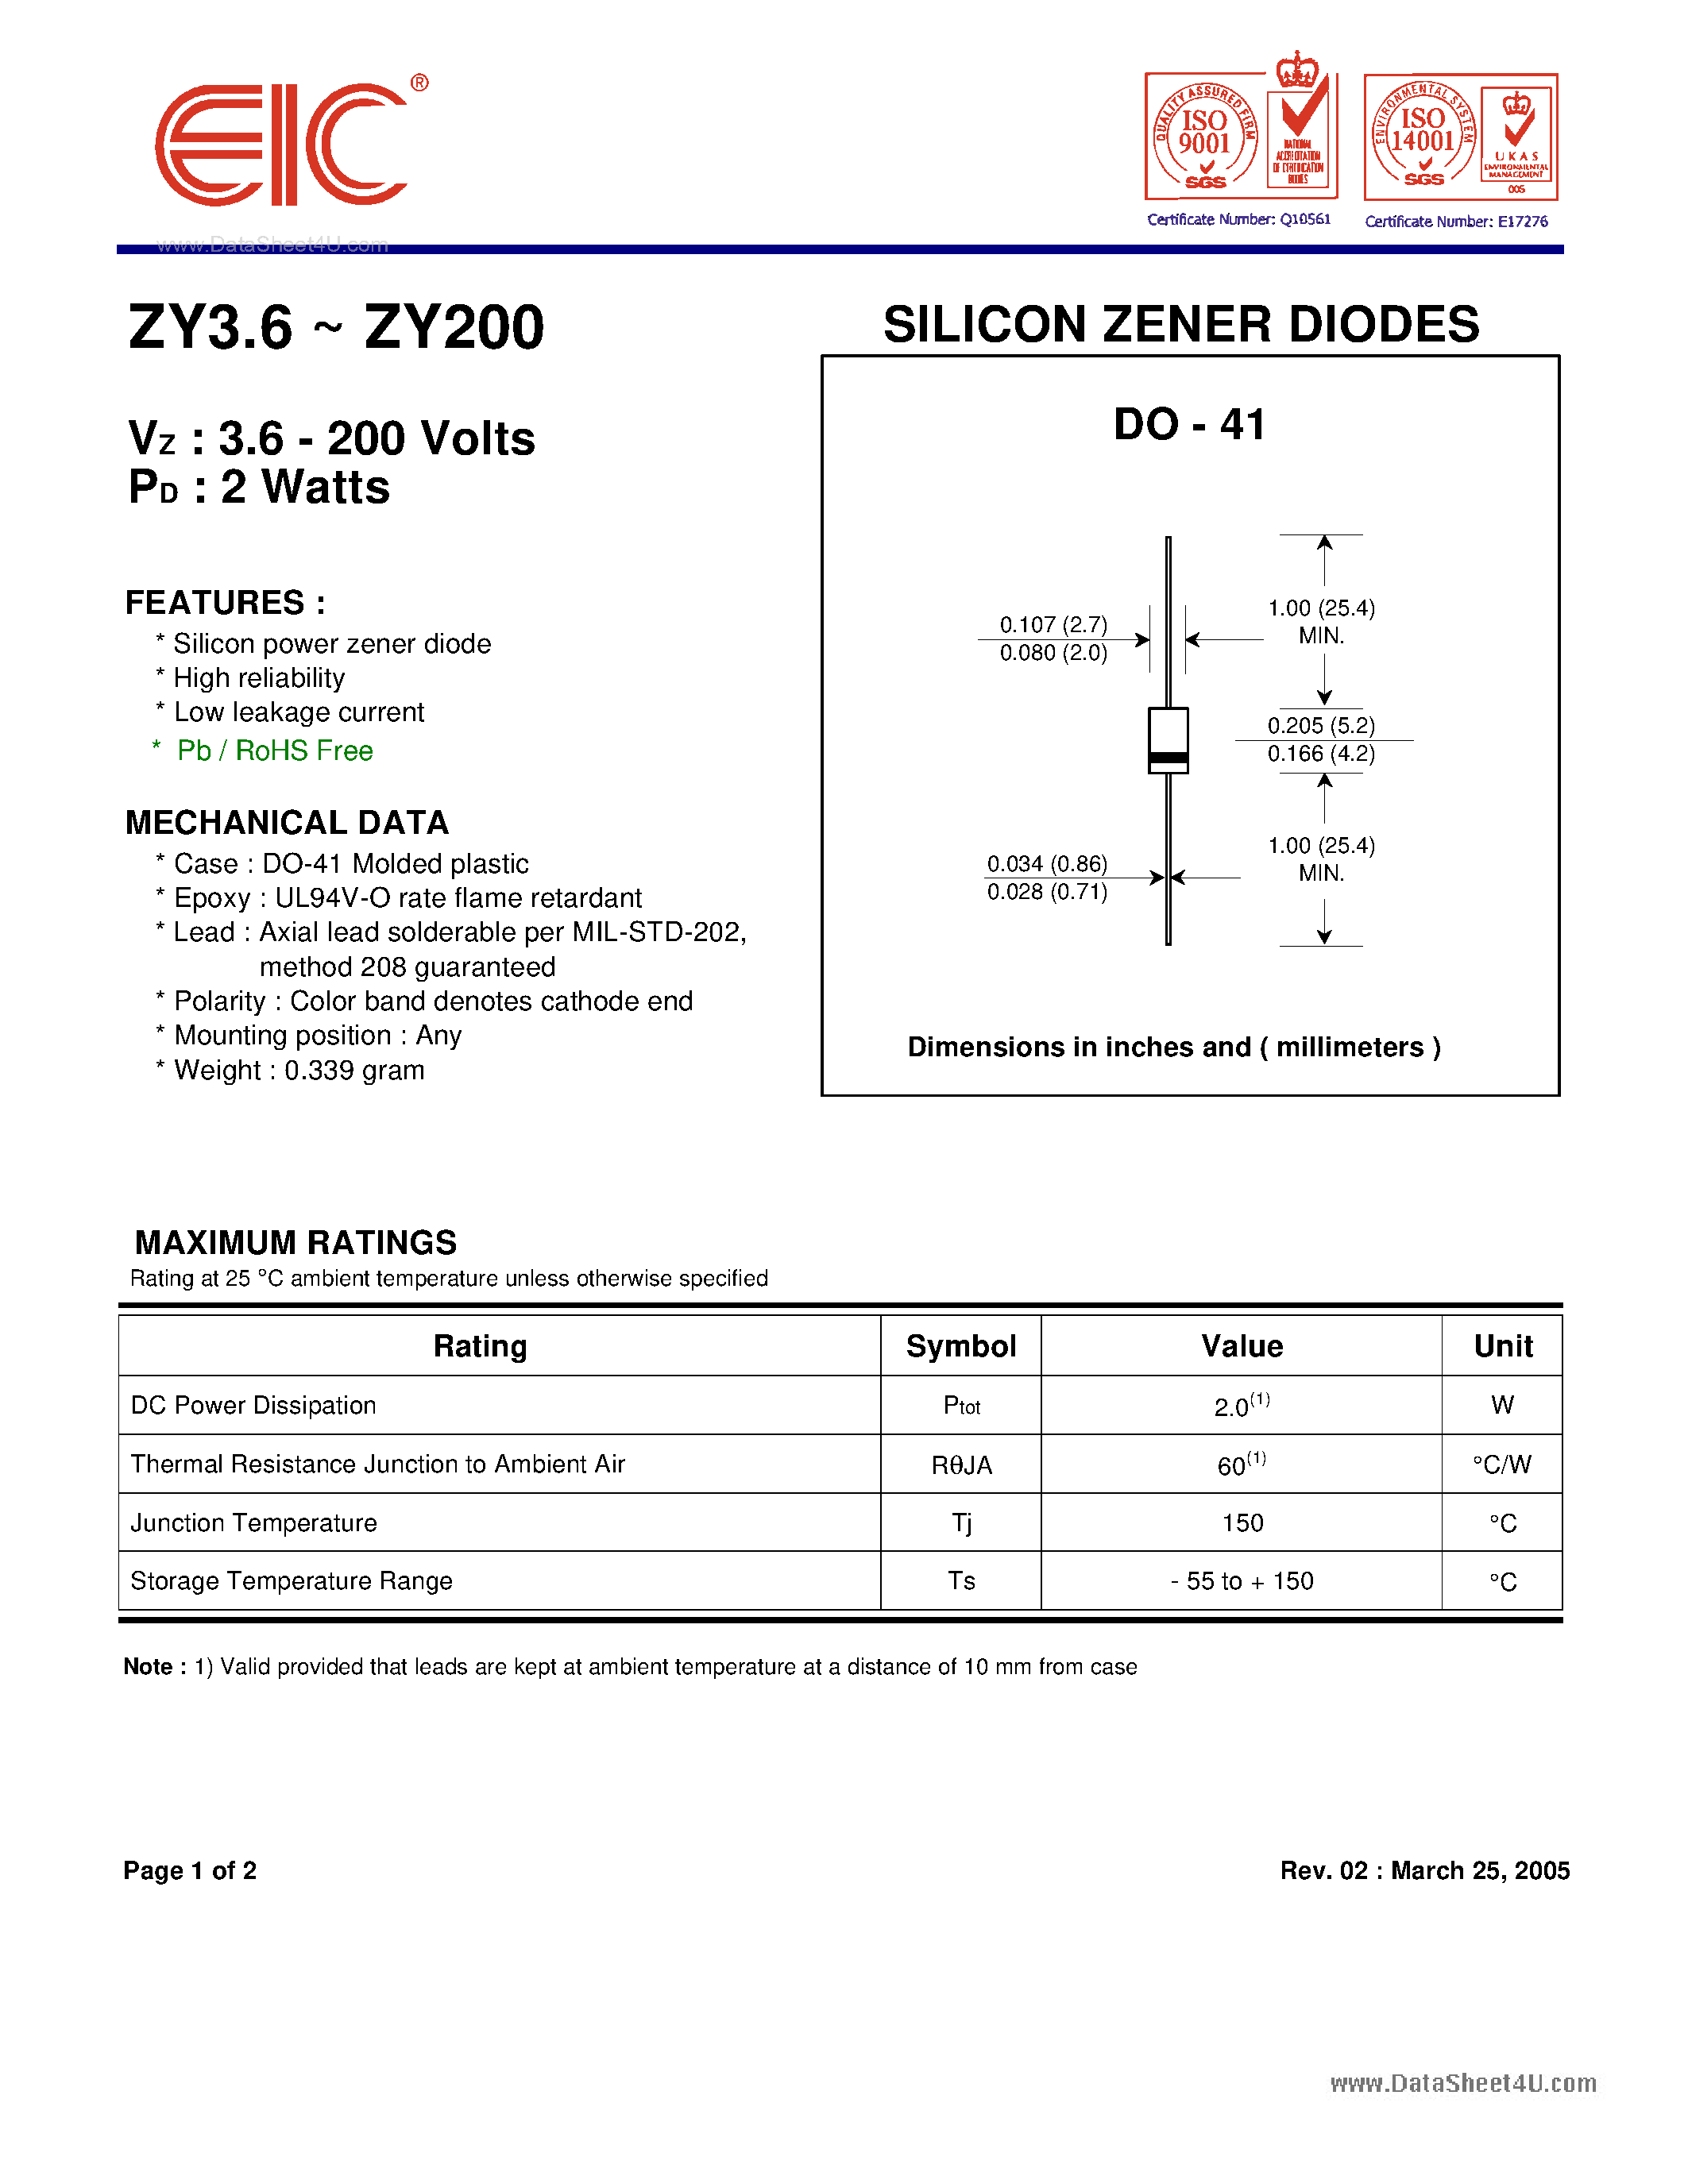 Datasheet ZY7.5 - SILICON ZENER DIODES page 1